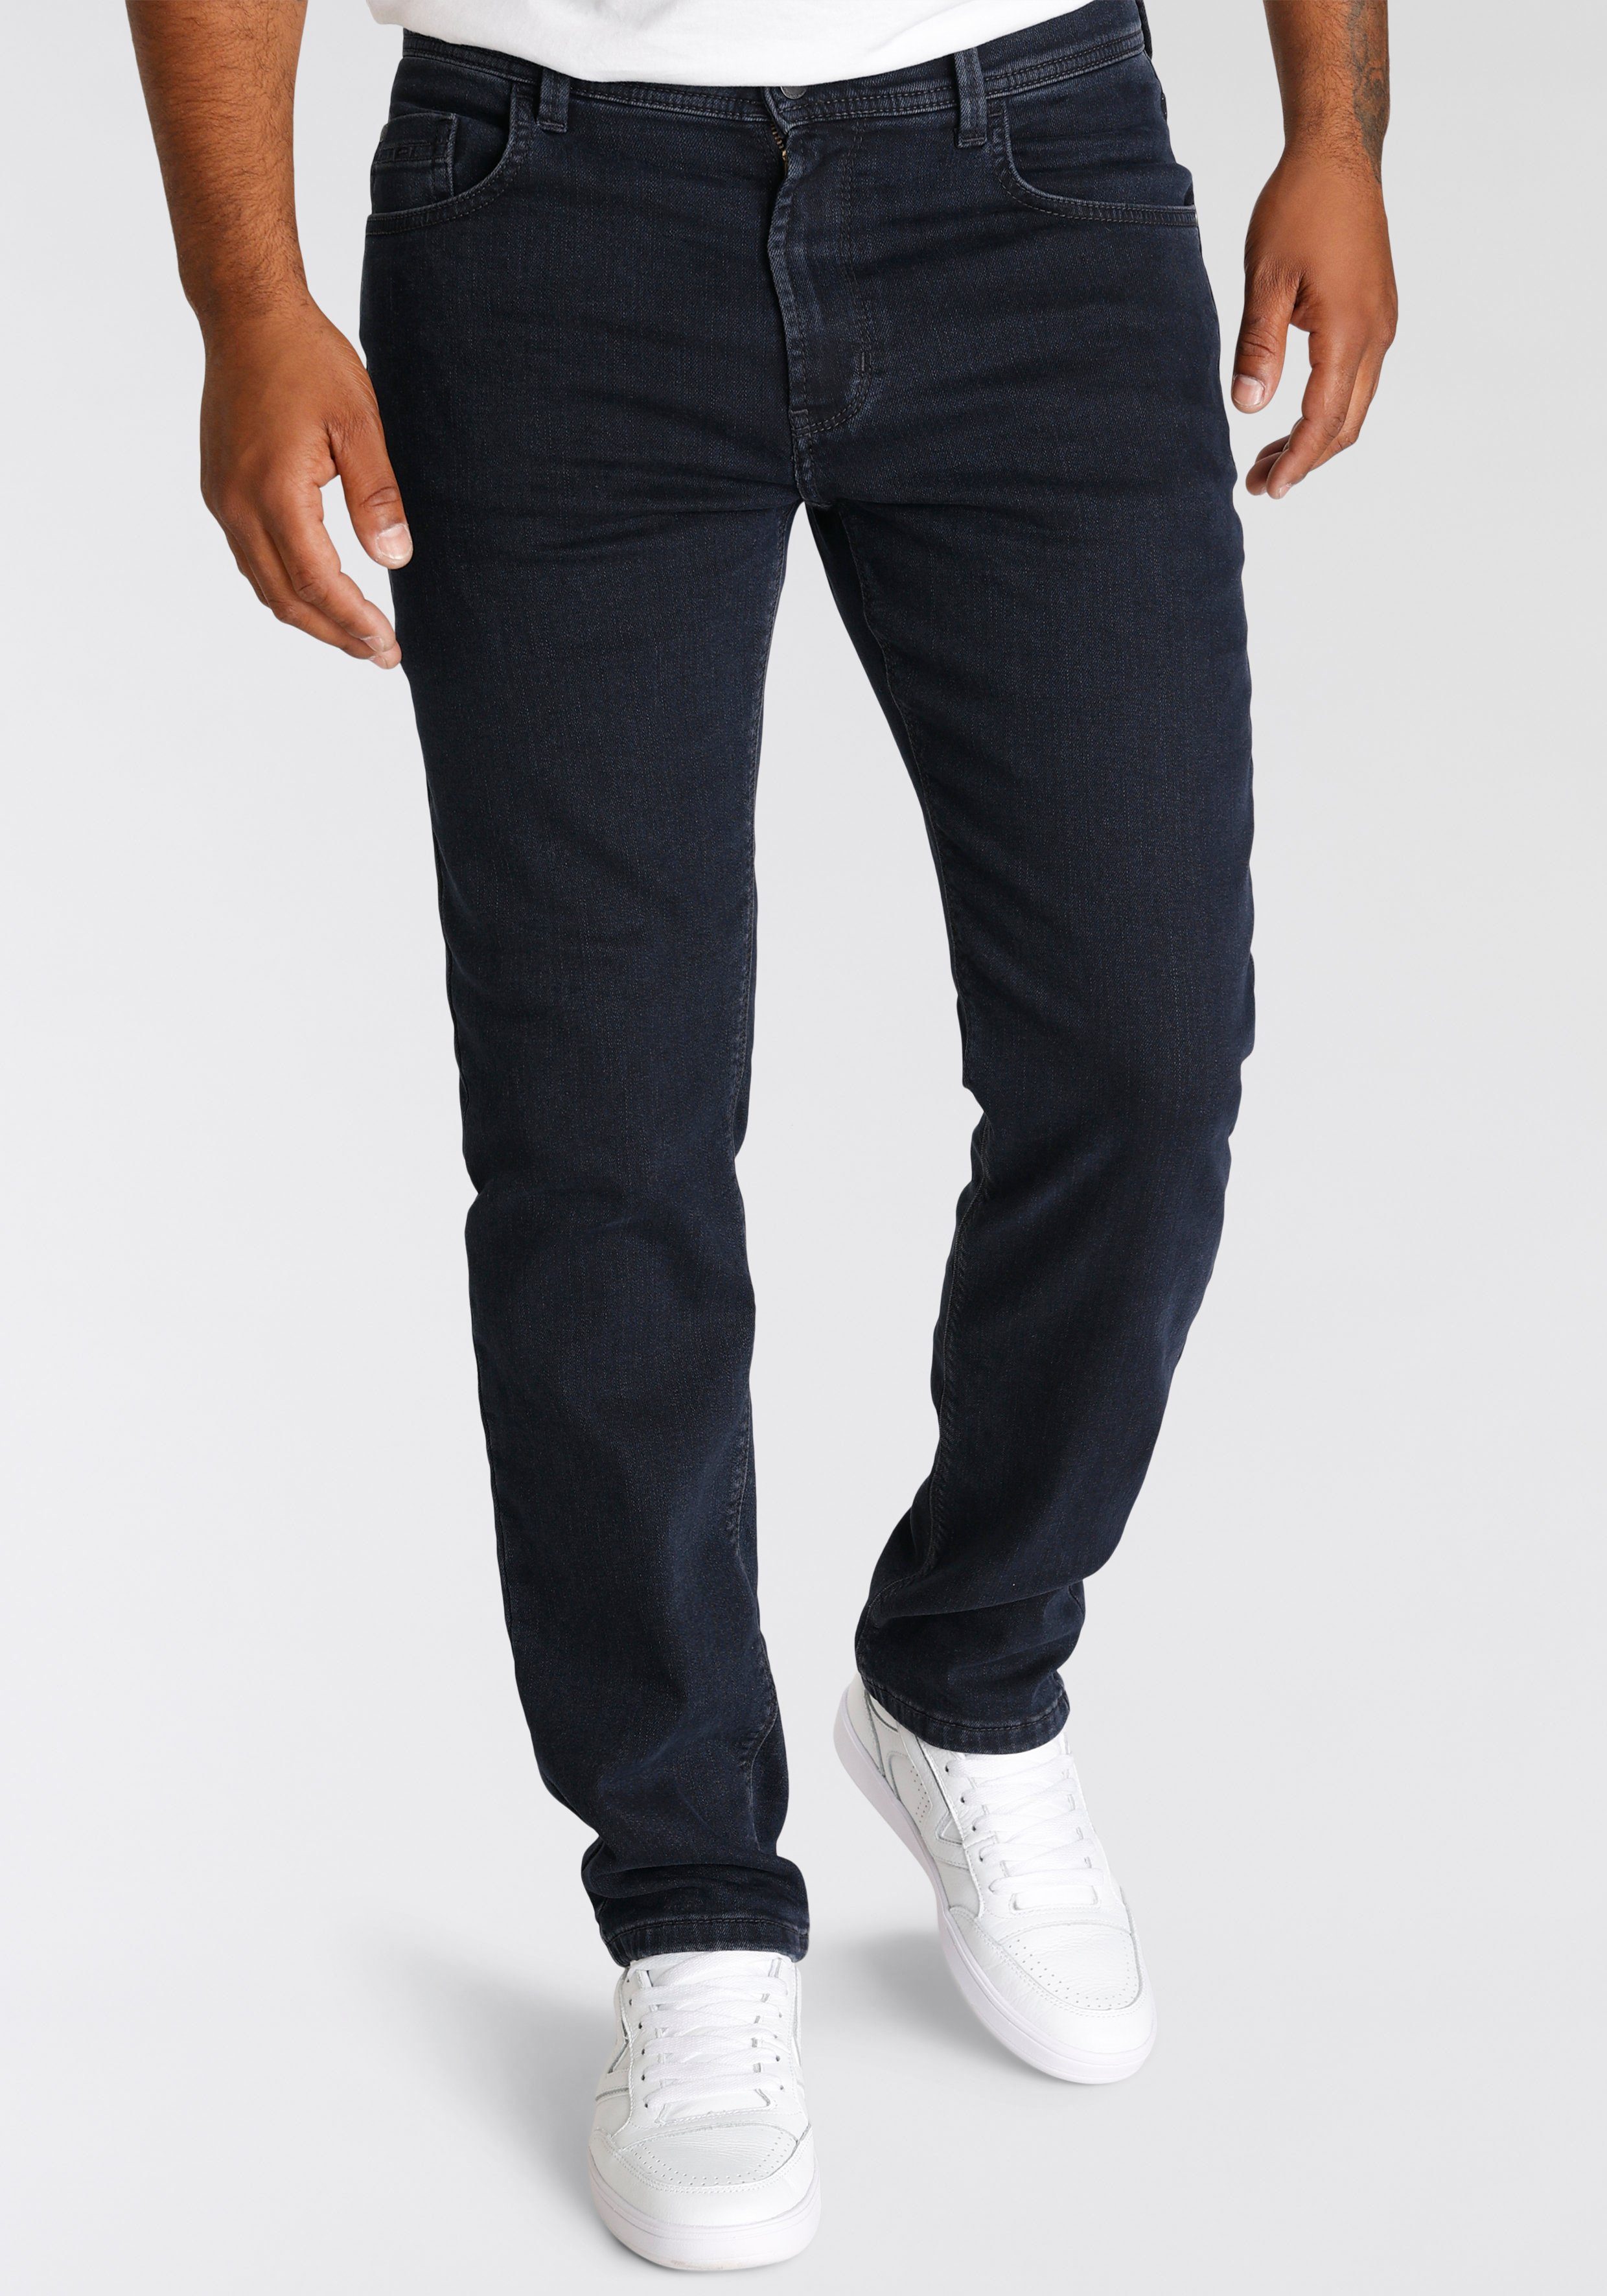 Pioneer Authentic Jeans Thermojeans Rando blue-black stonewash | Jeans